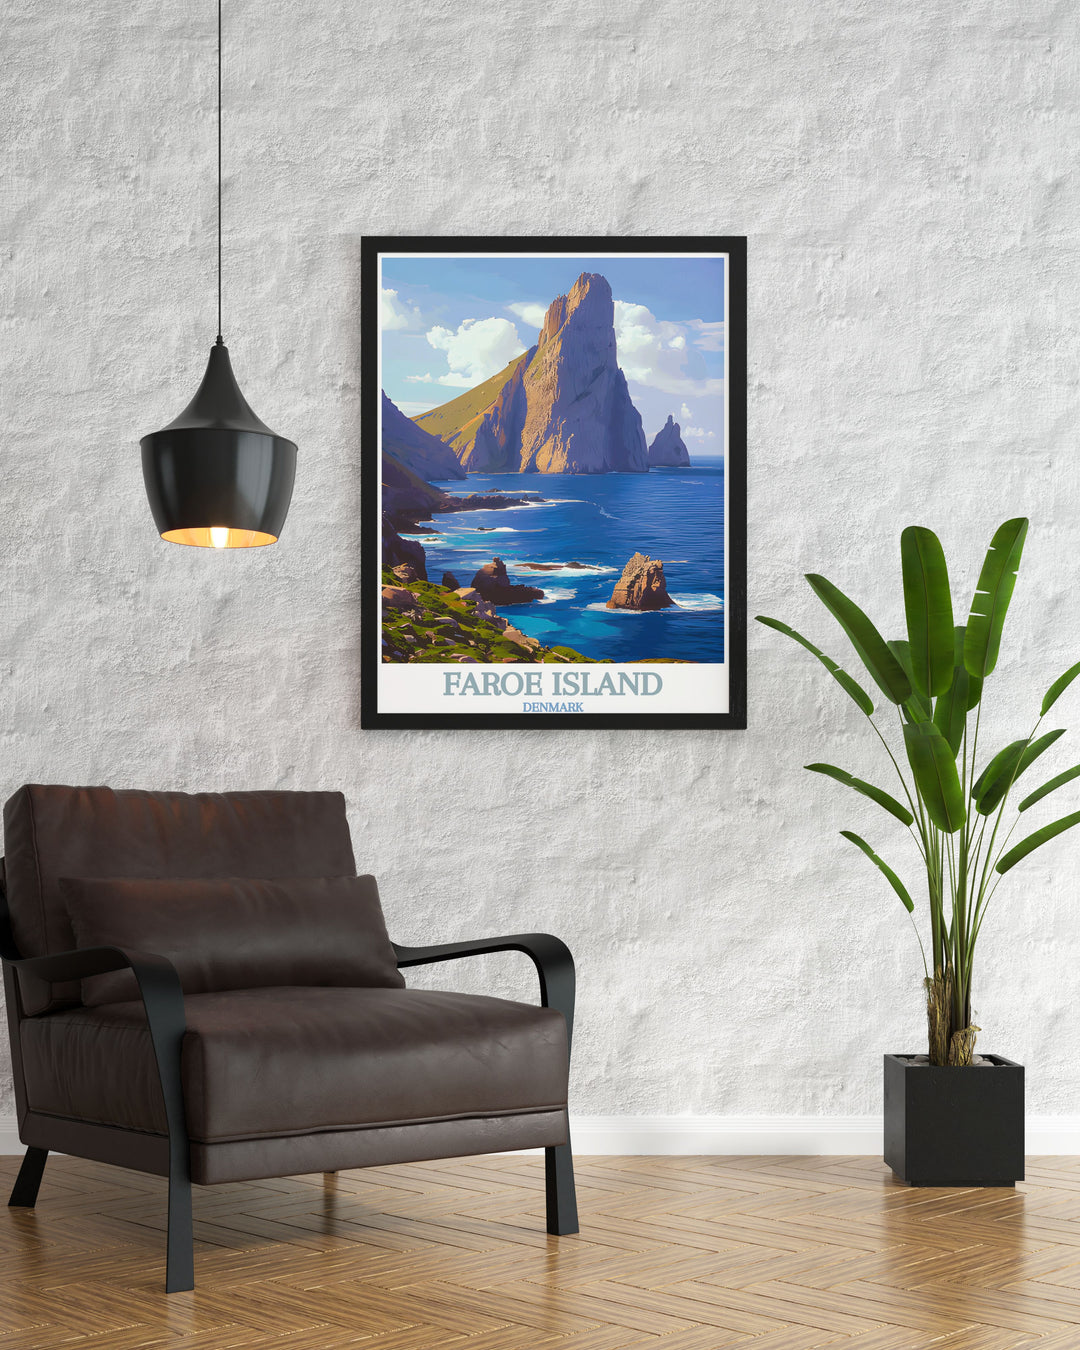 The serene beauty and rugged peaks of Tindhólmur are captured in this art print, perfect for adding a touch of the Faroe Islands charm to your home.